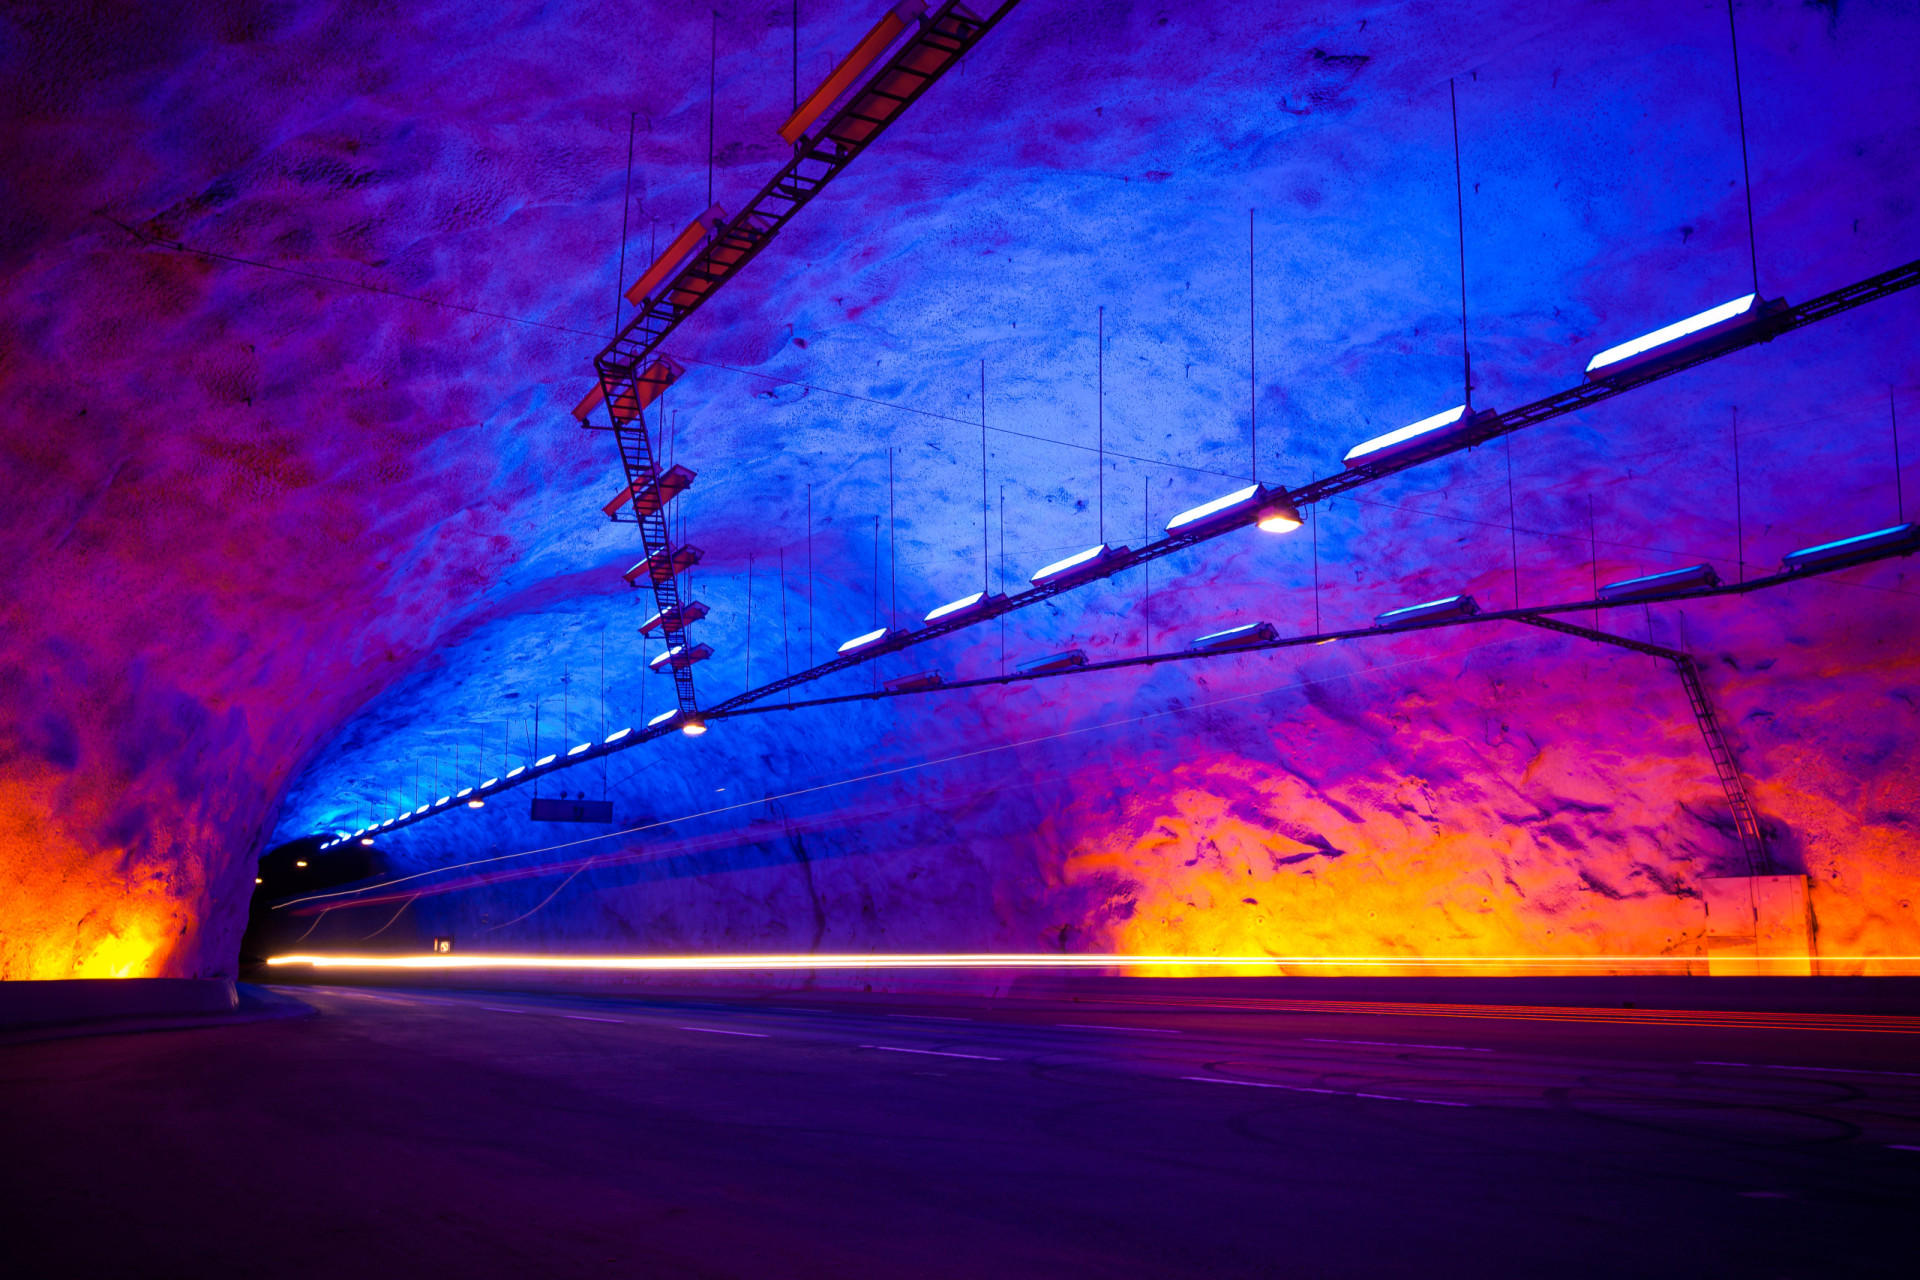 <p>The Lærdal Tunnel in Norway carries two lanes of European Route E16. At 15 miles long (24 km), this is the longest road tunnel in the world. It serves as the final link completing the main highway that now enables car travel between Oslo and Bergen.</p><p>You may also like:<a href="https://www.starsinsider.com/n/490475?utm_source=msn.com&utm_medium=display&utm_campaign=referral_description&utm_content=697904en-us"> What you might not know about angels</a></p>